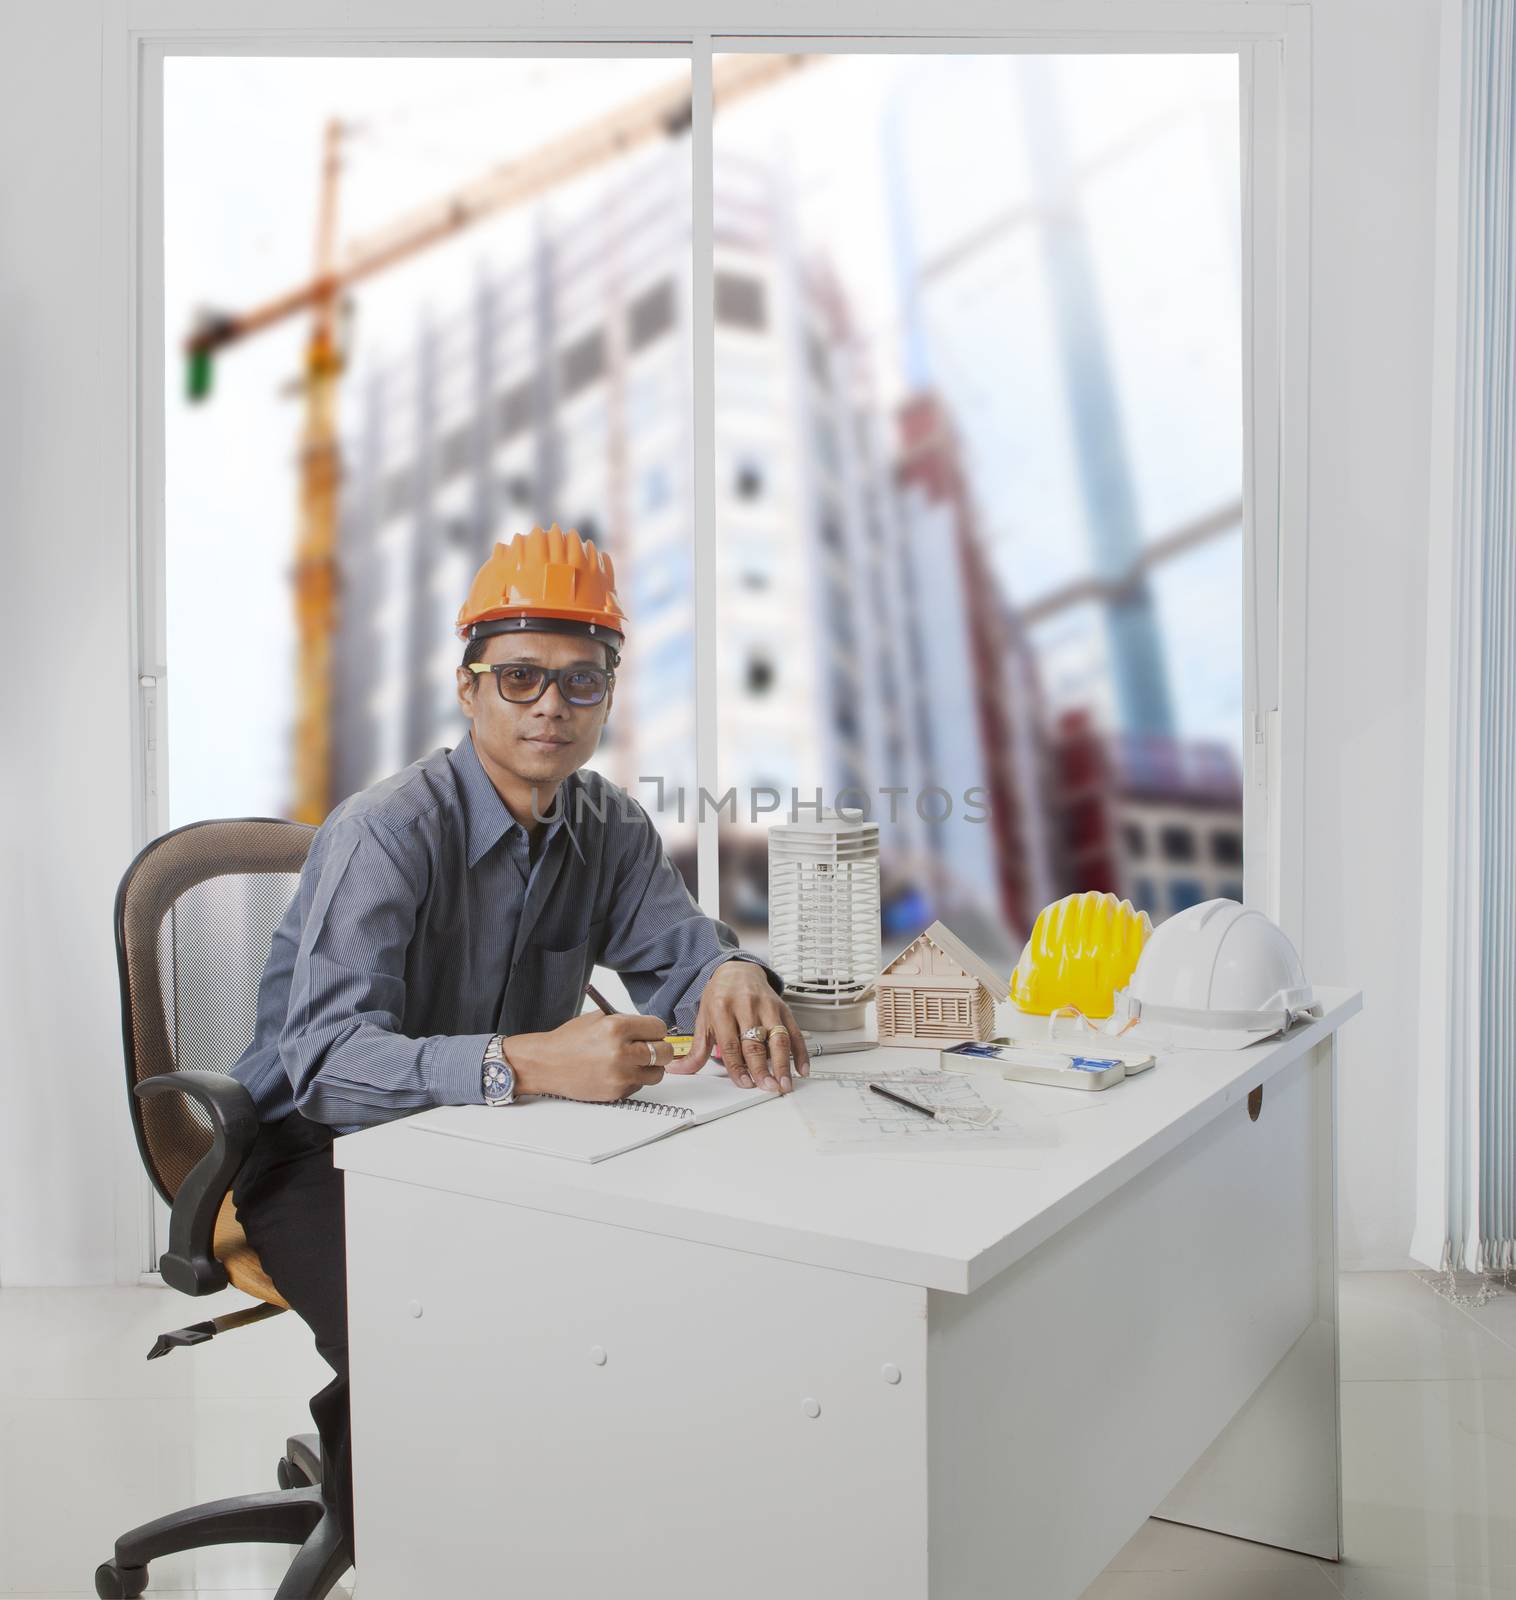 architect engineer working in office room against building construction through mirror window  use for architecture and engineering construction industry business theme and real estate land management